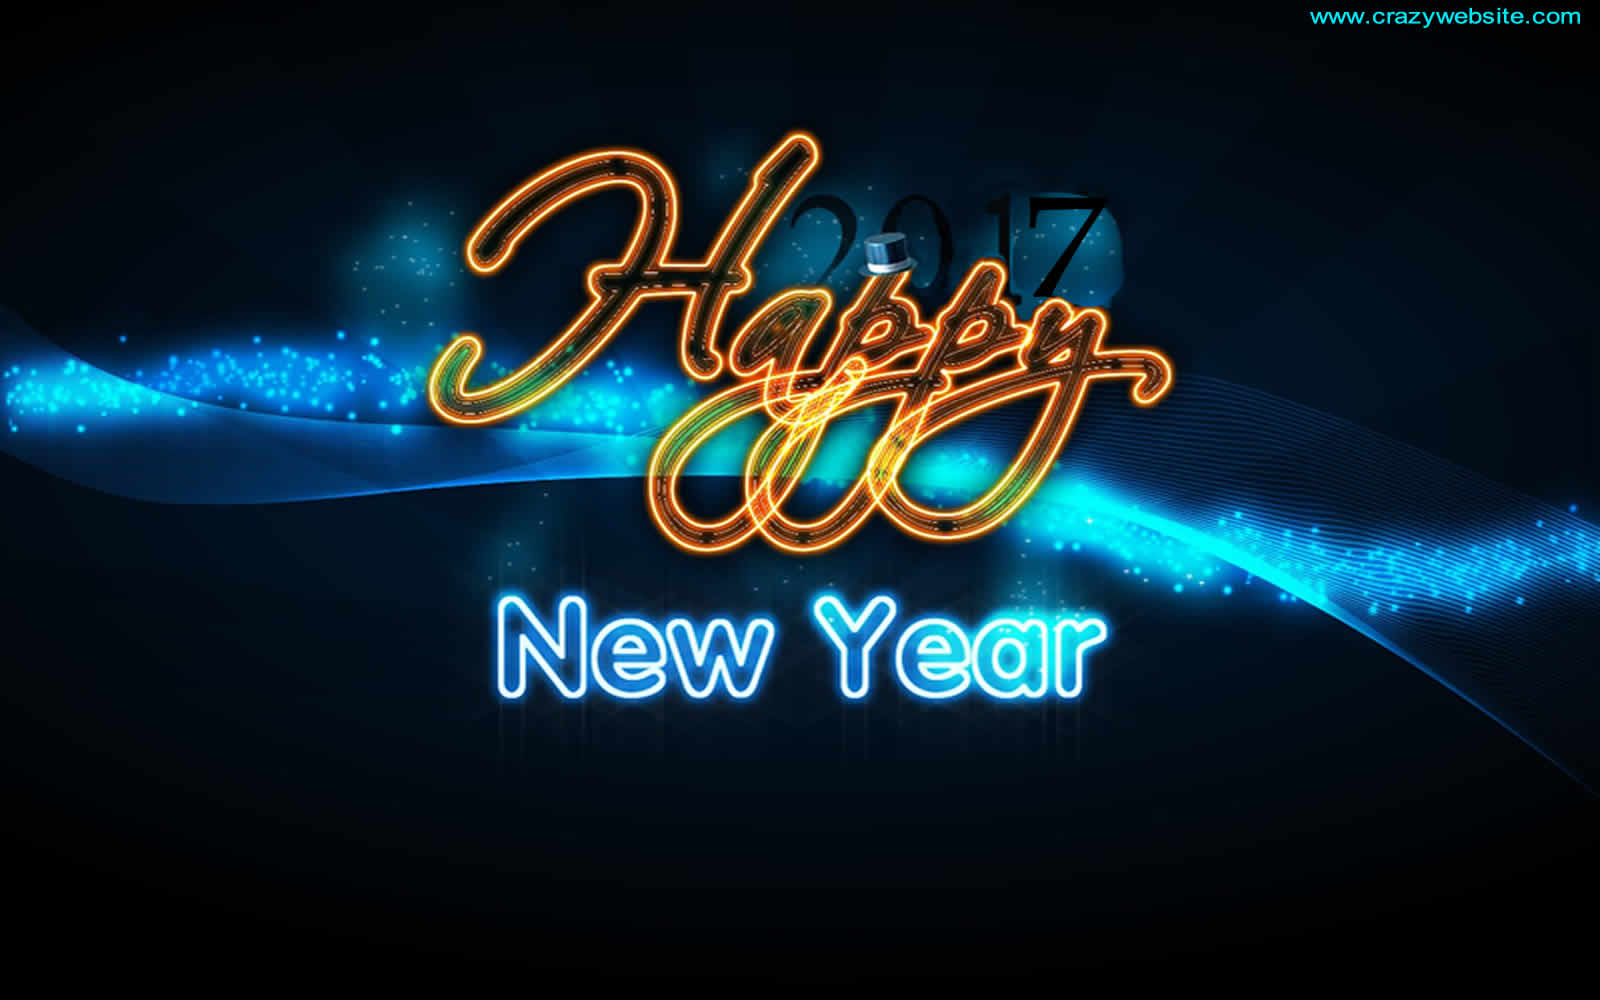 Wallpaper Free New Year 2016  2017 Graphic Image Gallery Wallpaper